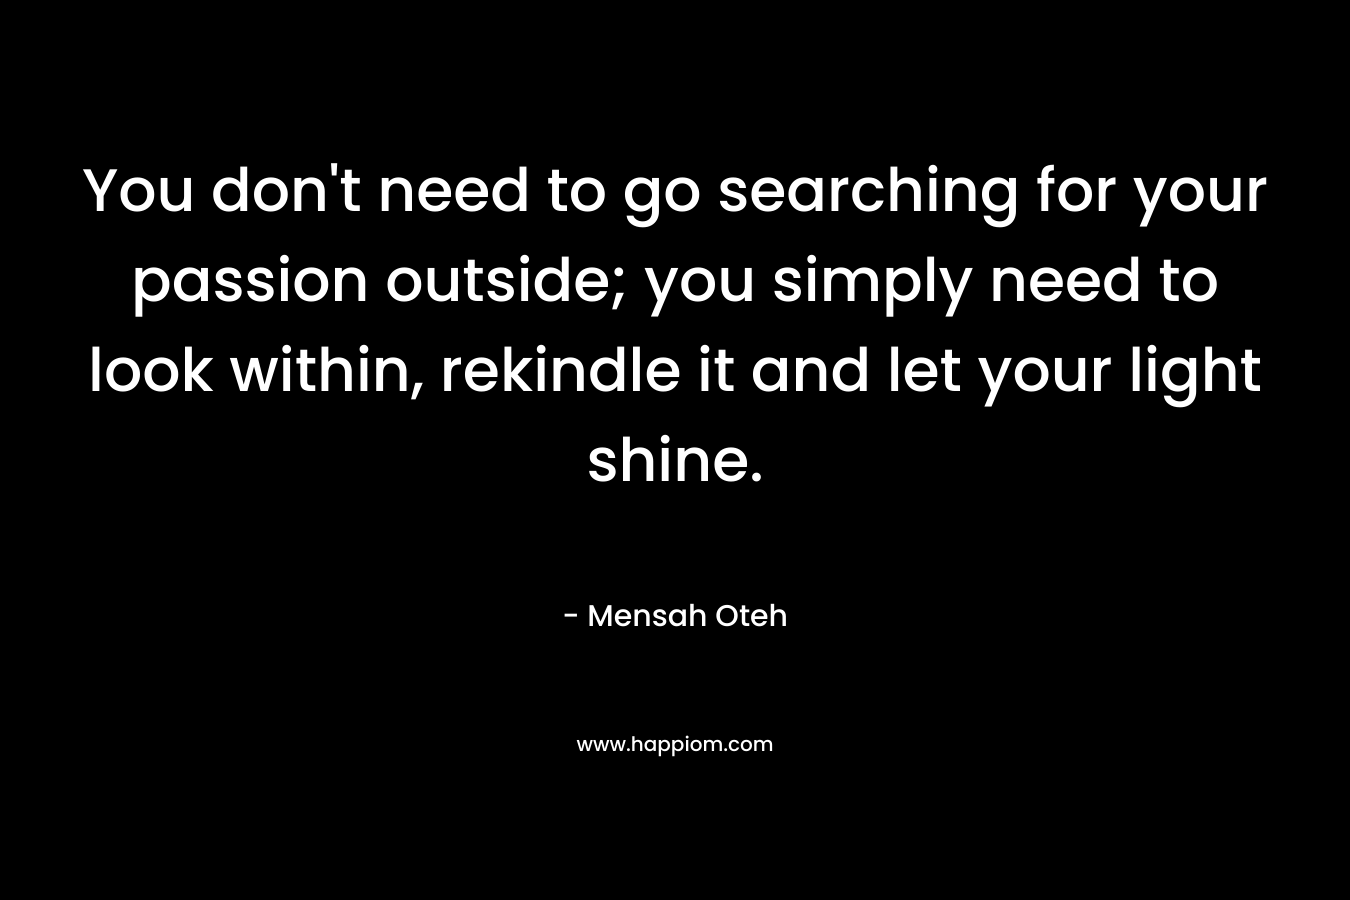 You don't need to go searching for your passion outside; you simply need to look within, rekindle it and let your light shine.